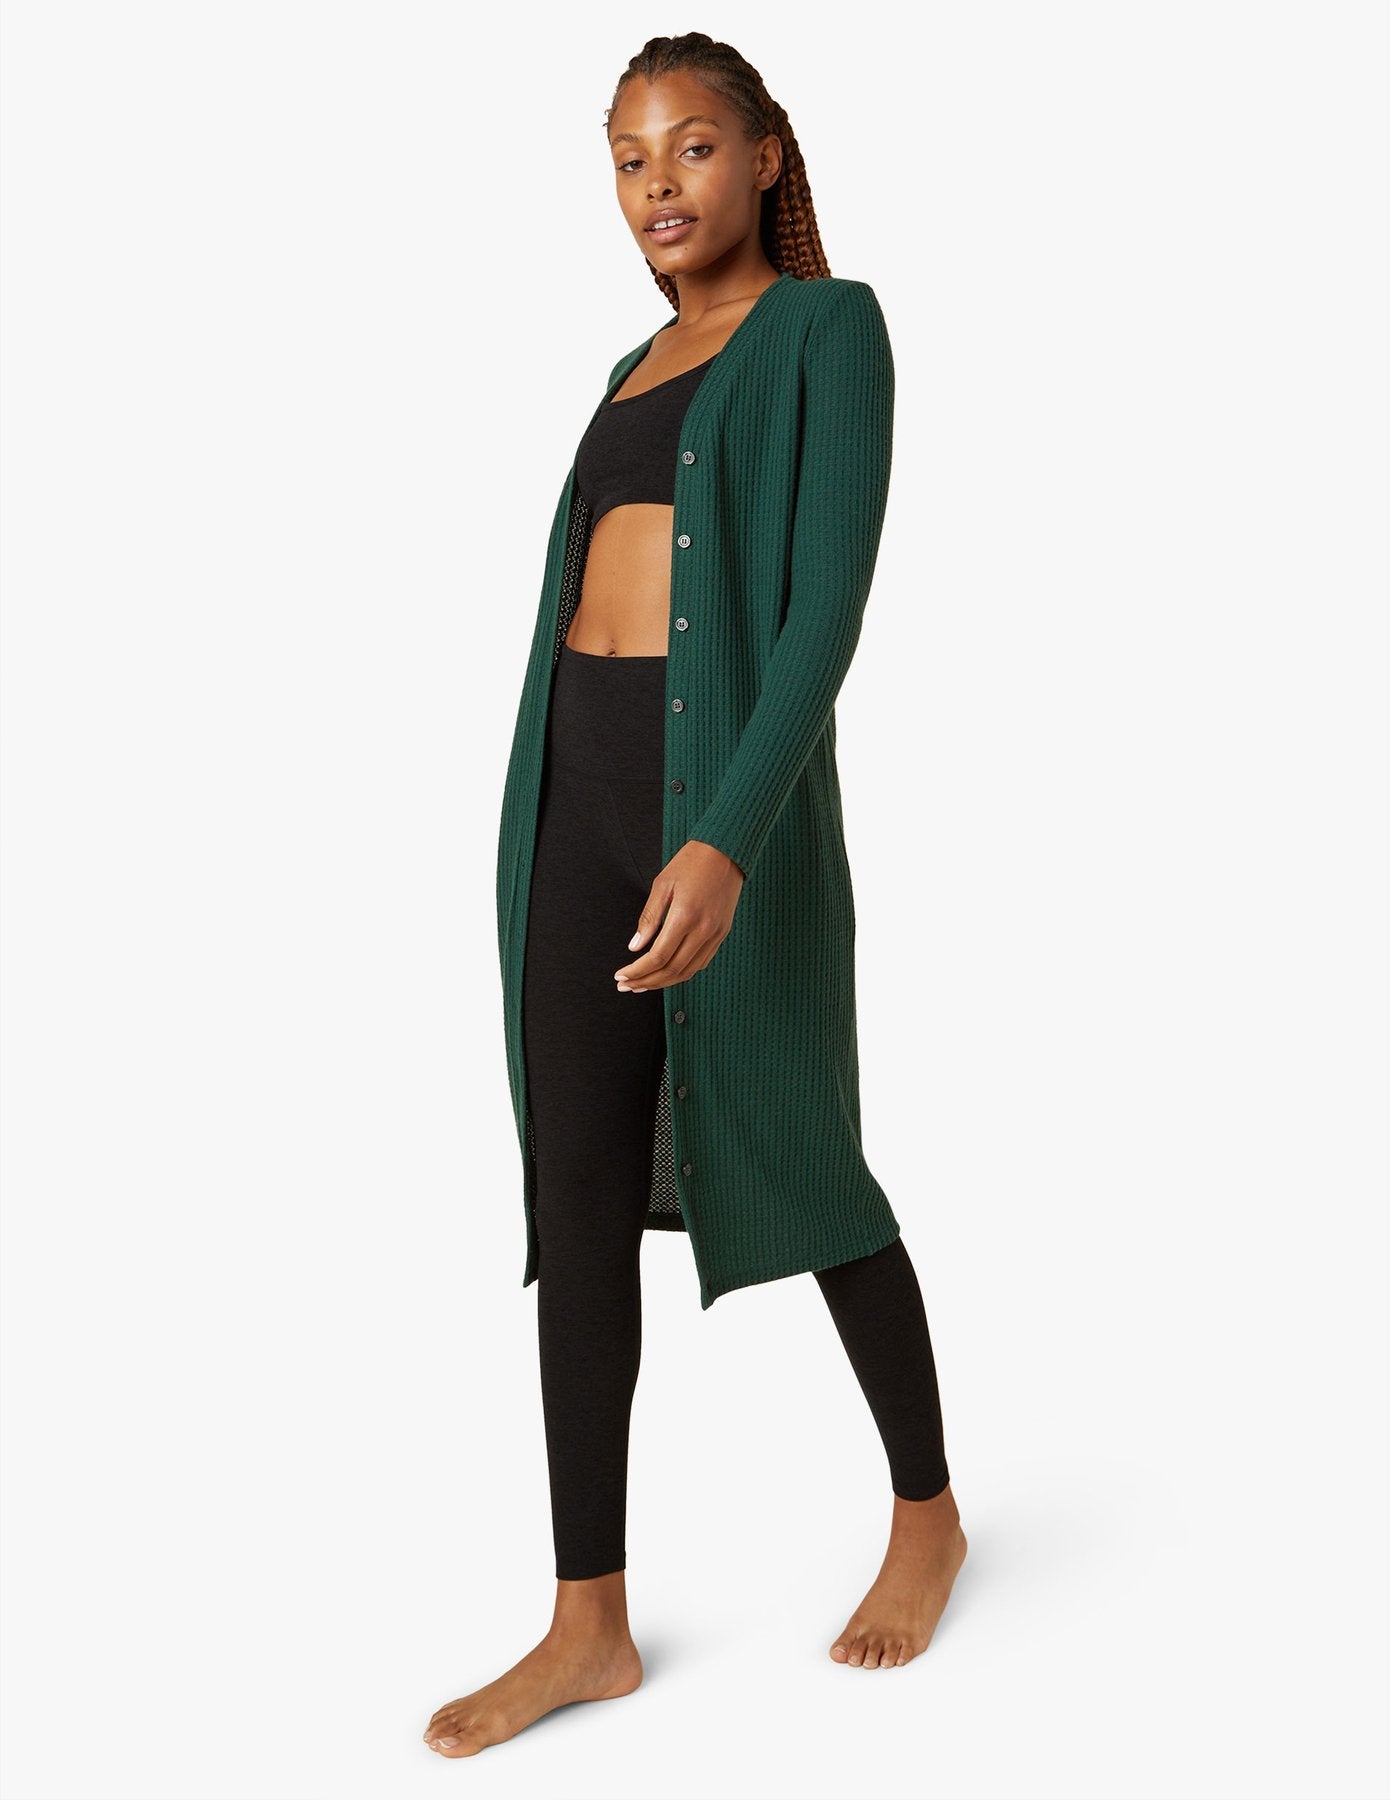 Your Line Waffle Knit 2-in-1 Duster/Dress